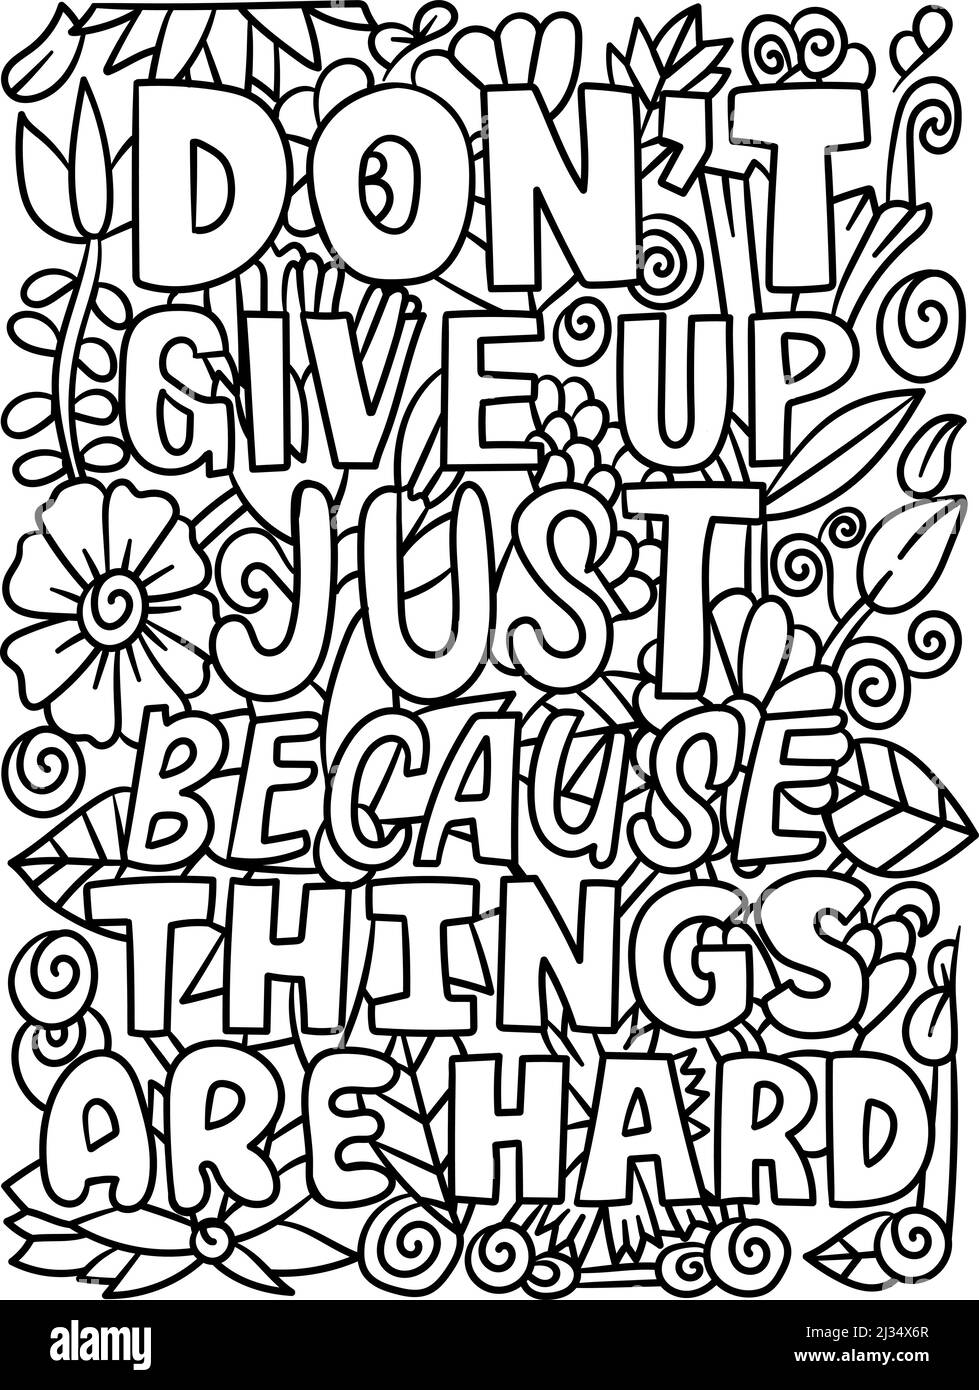 820 Collections Quote Cute Coloring Pages For Adults Latest HD ...